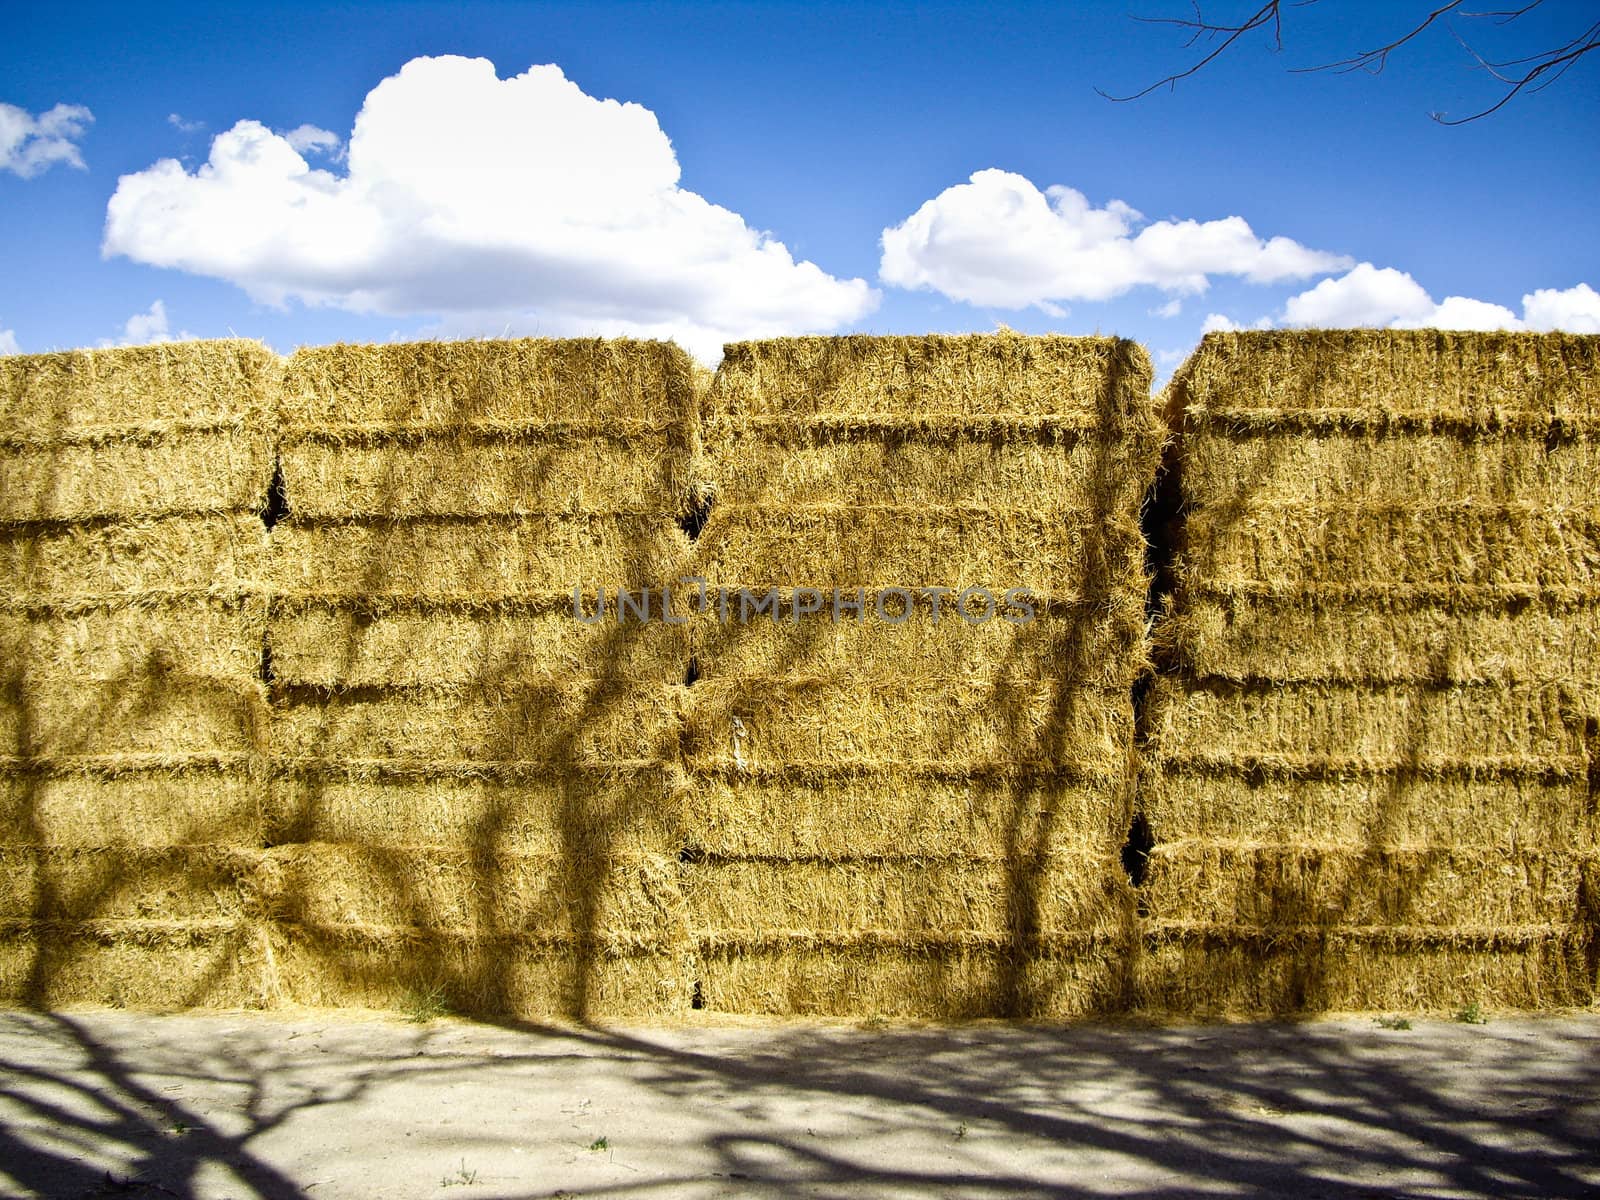 Hay bales dry in the sunlight